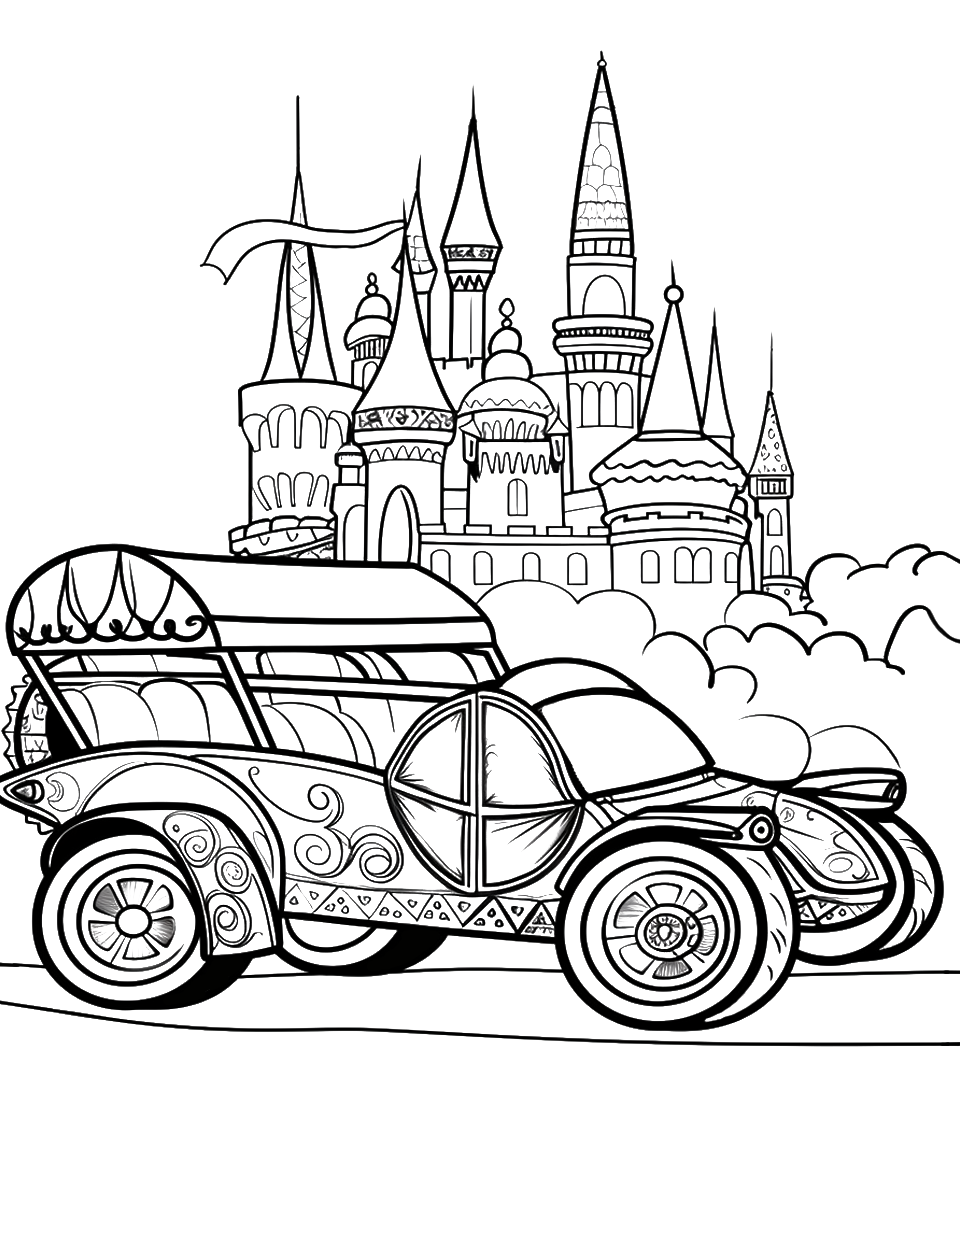 Royal Carriage Procession Coloring Page - A Hot Wheels car designed like a royal carriage, with a castle in the background.